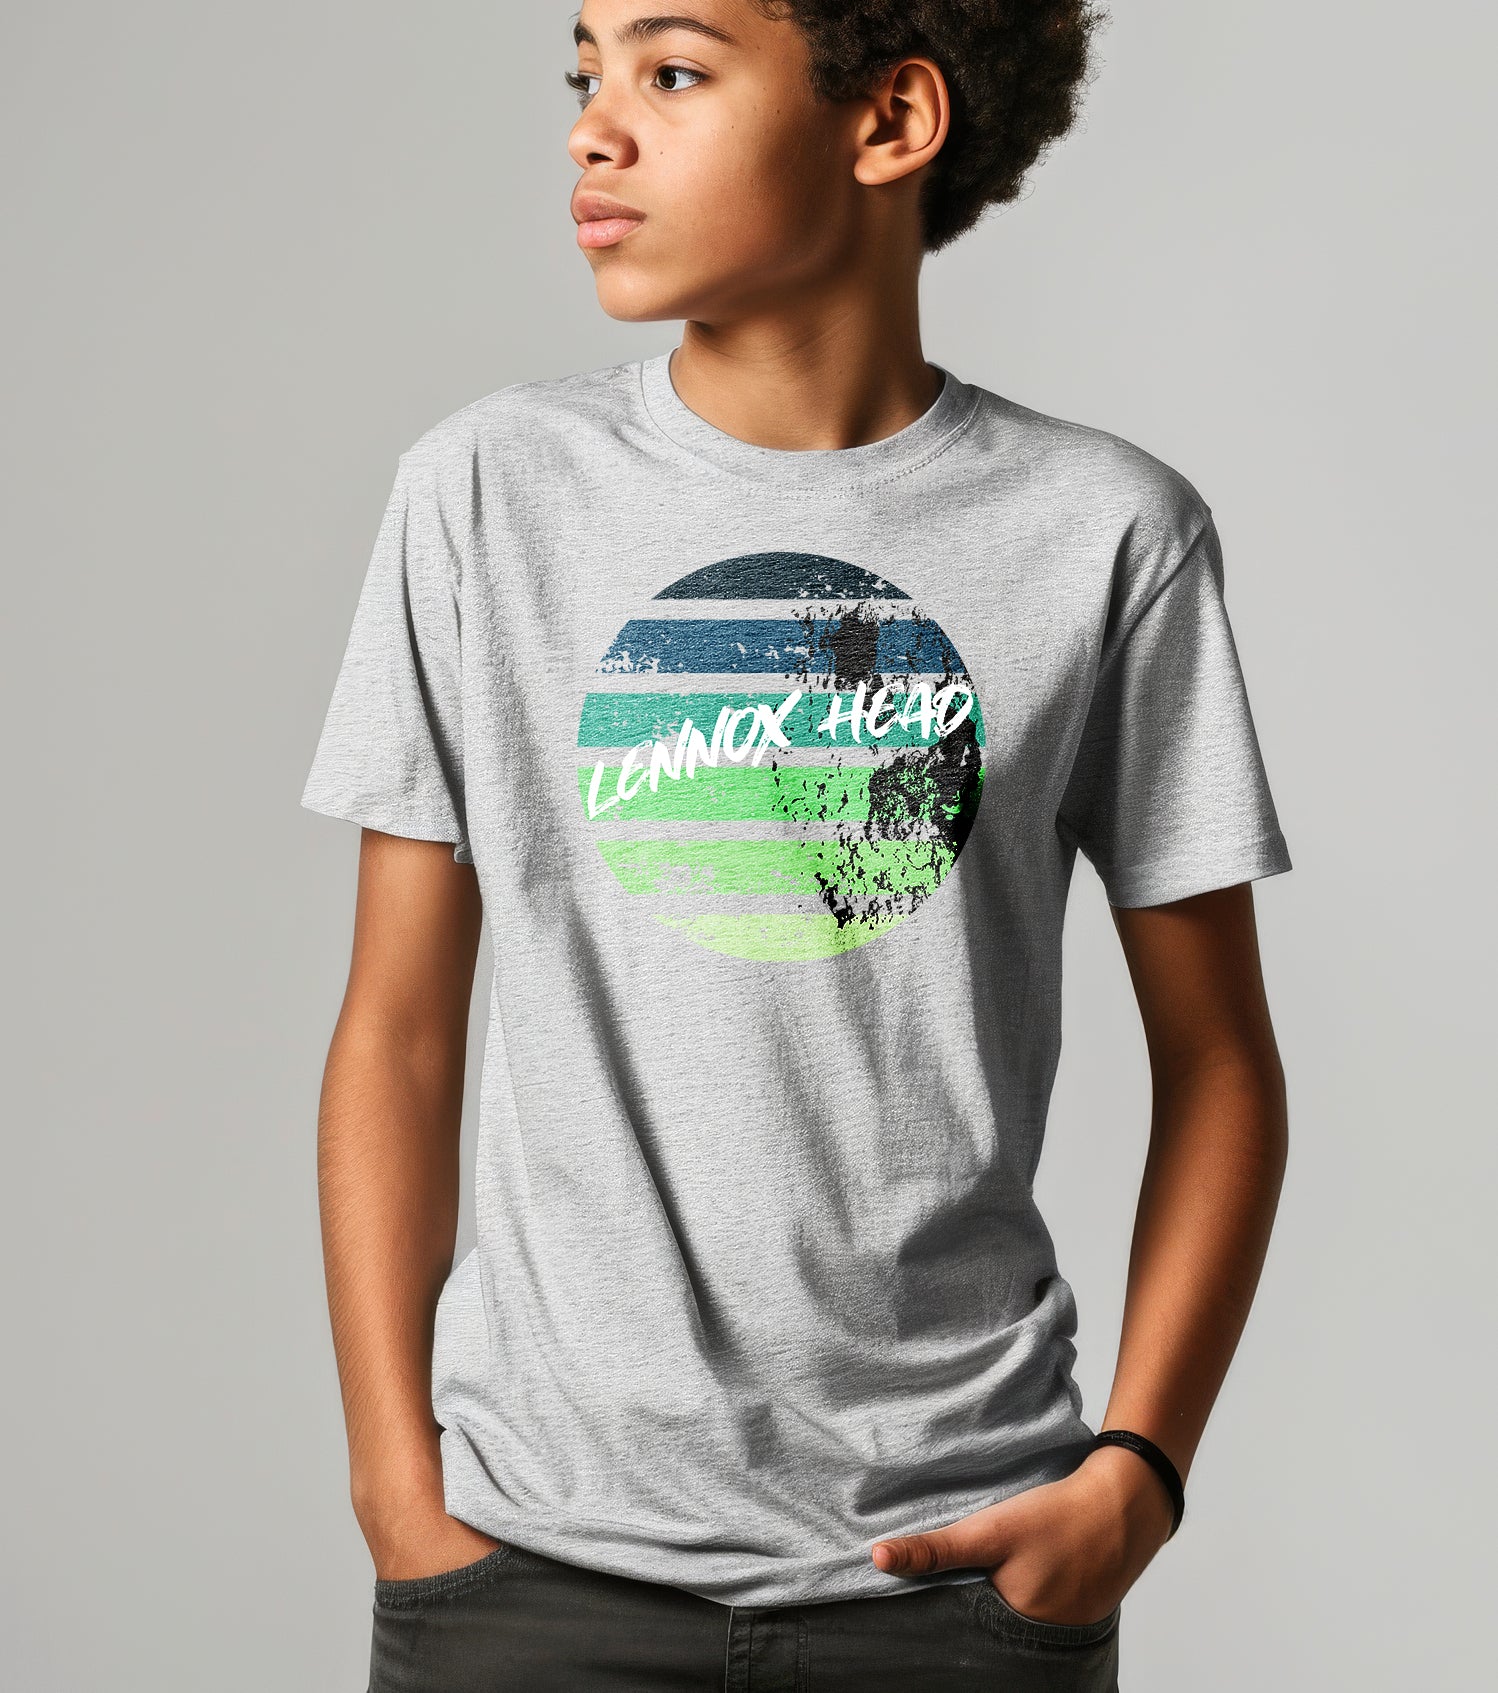 Sands of Serenity: Beach Life Inspired T-Shirts